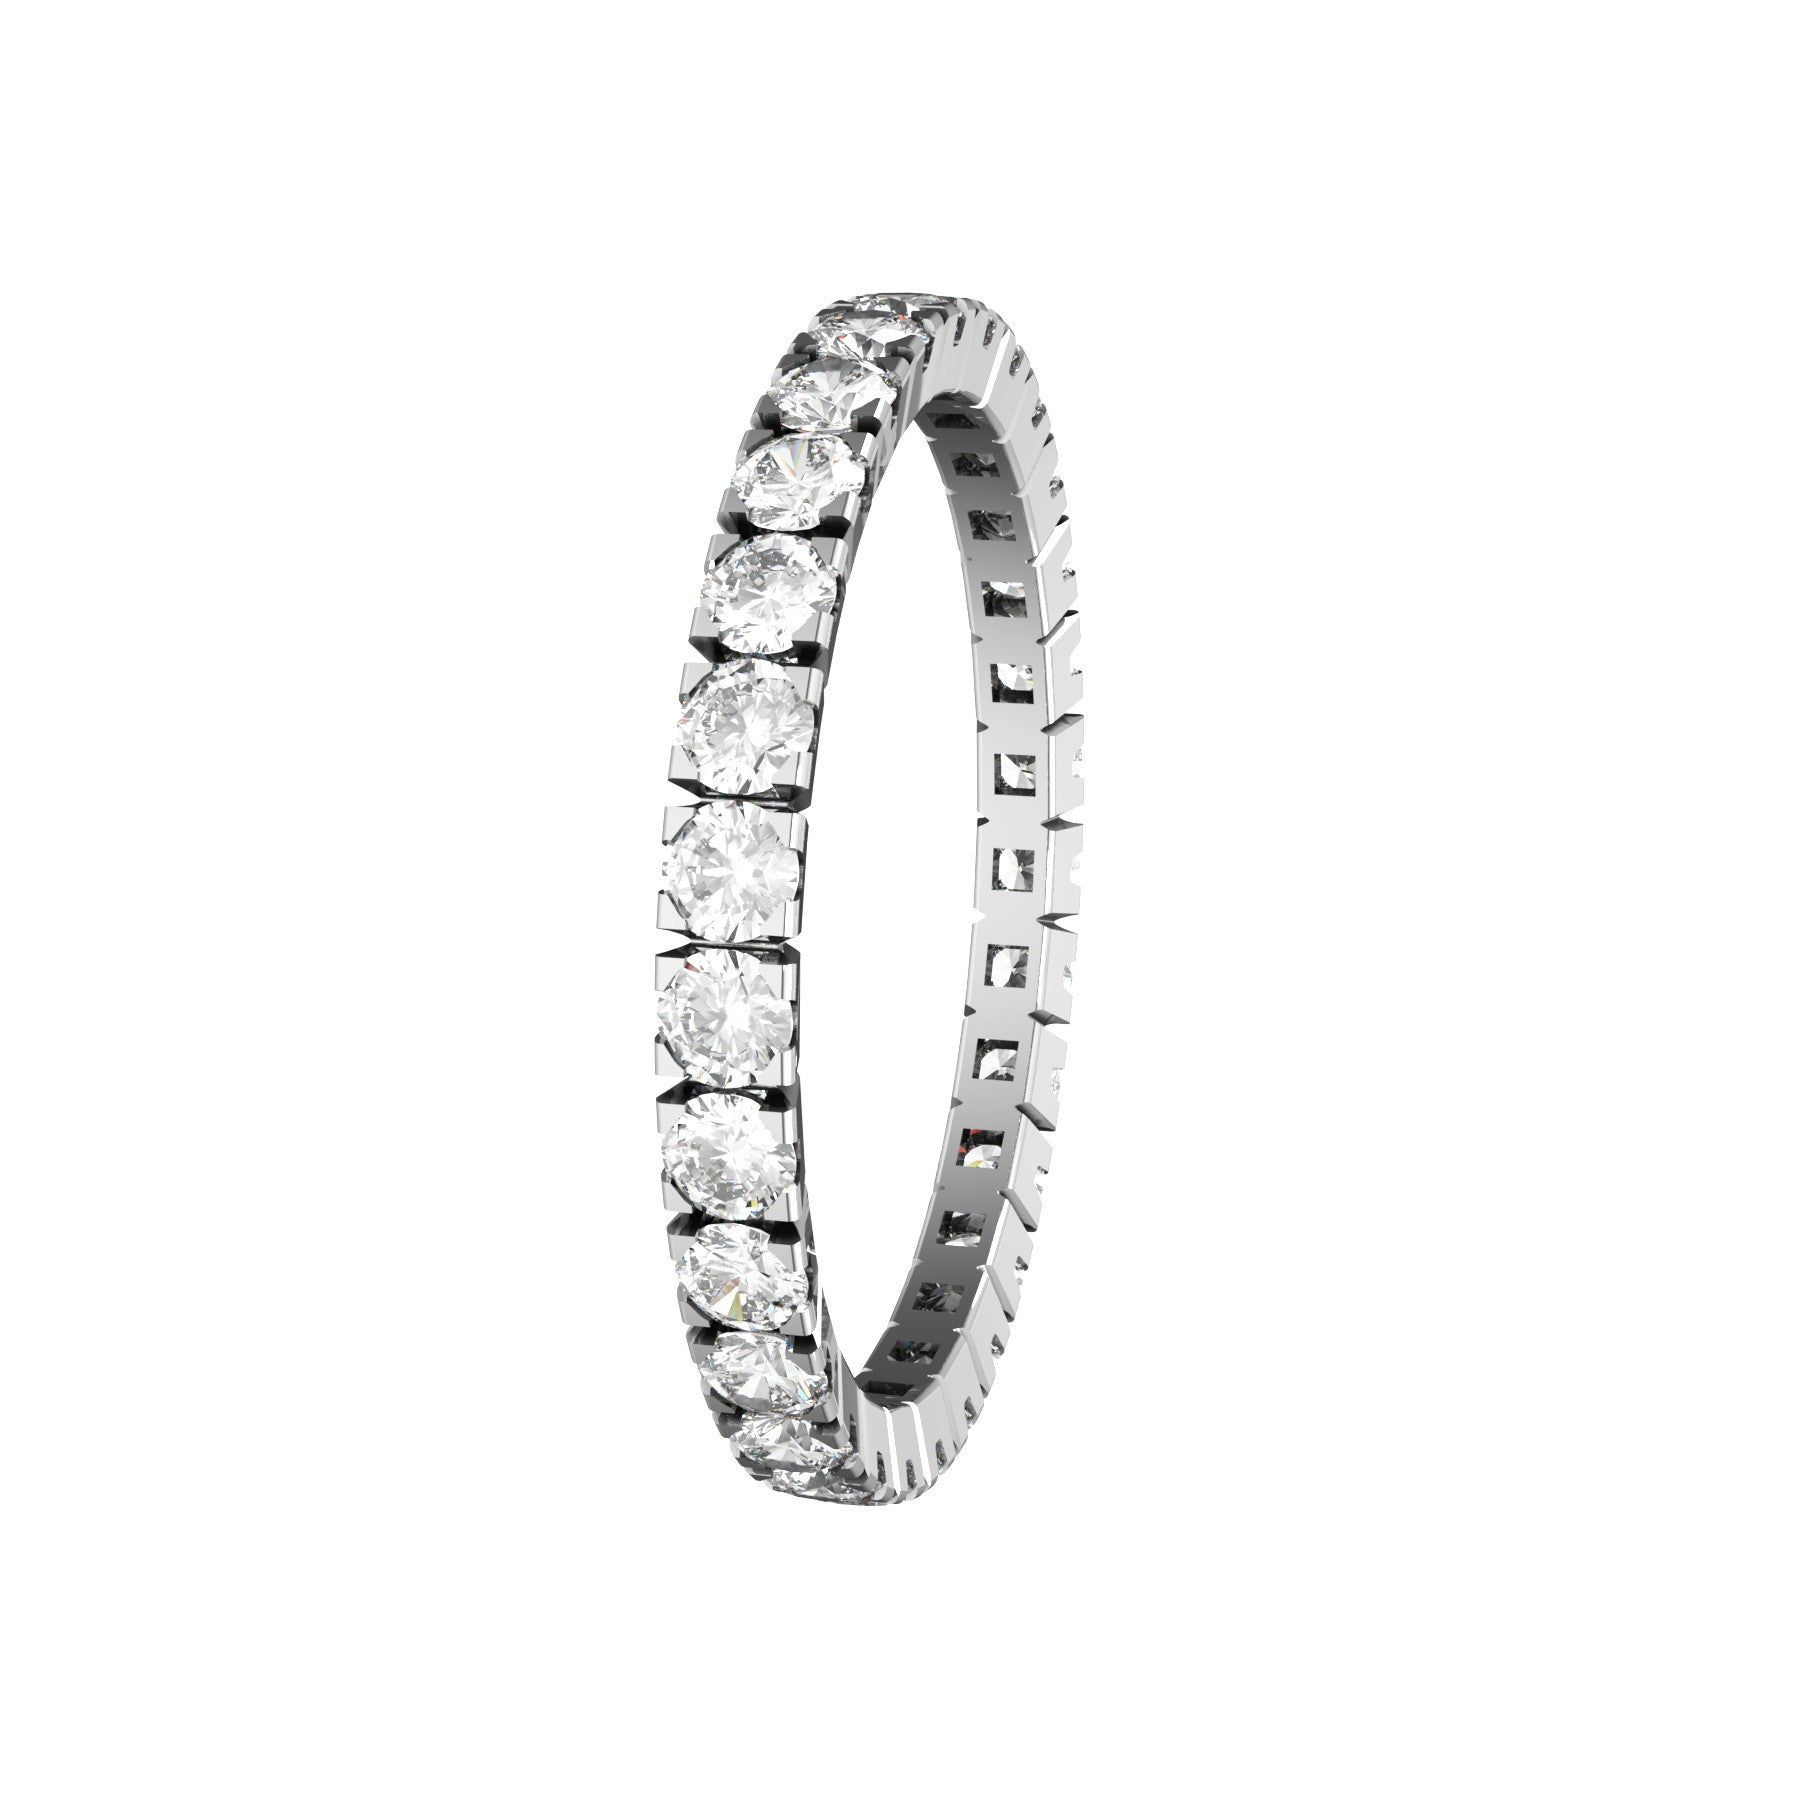 forever wedding ring, 18 K white gold, 0,03 ct round natural diamond, weight about 1,3 g. (0.04 oz), width 2,00 mm